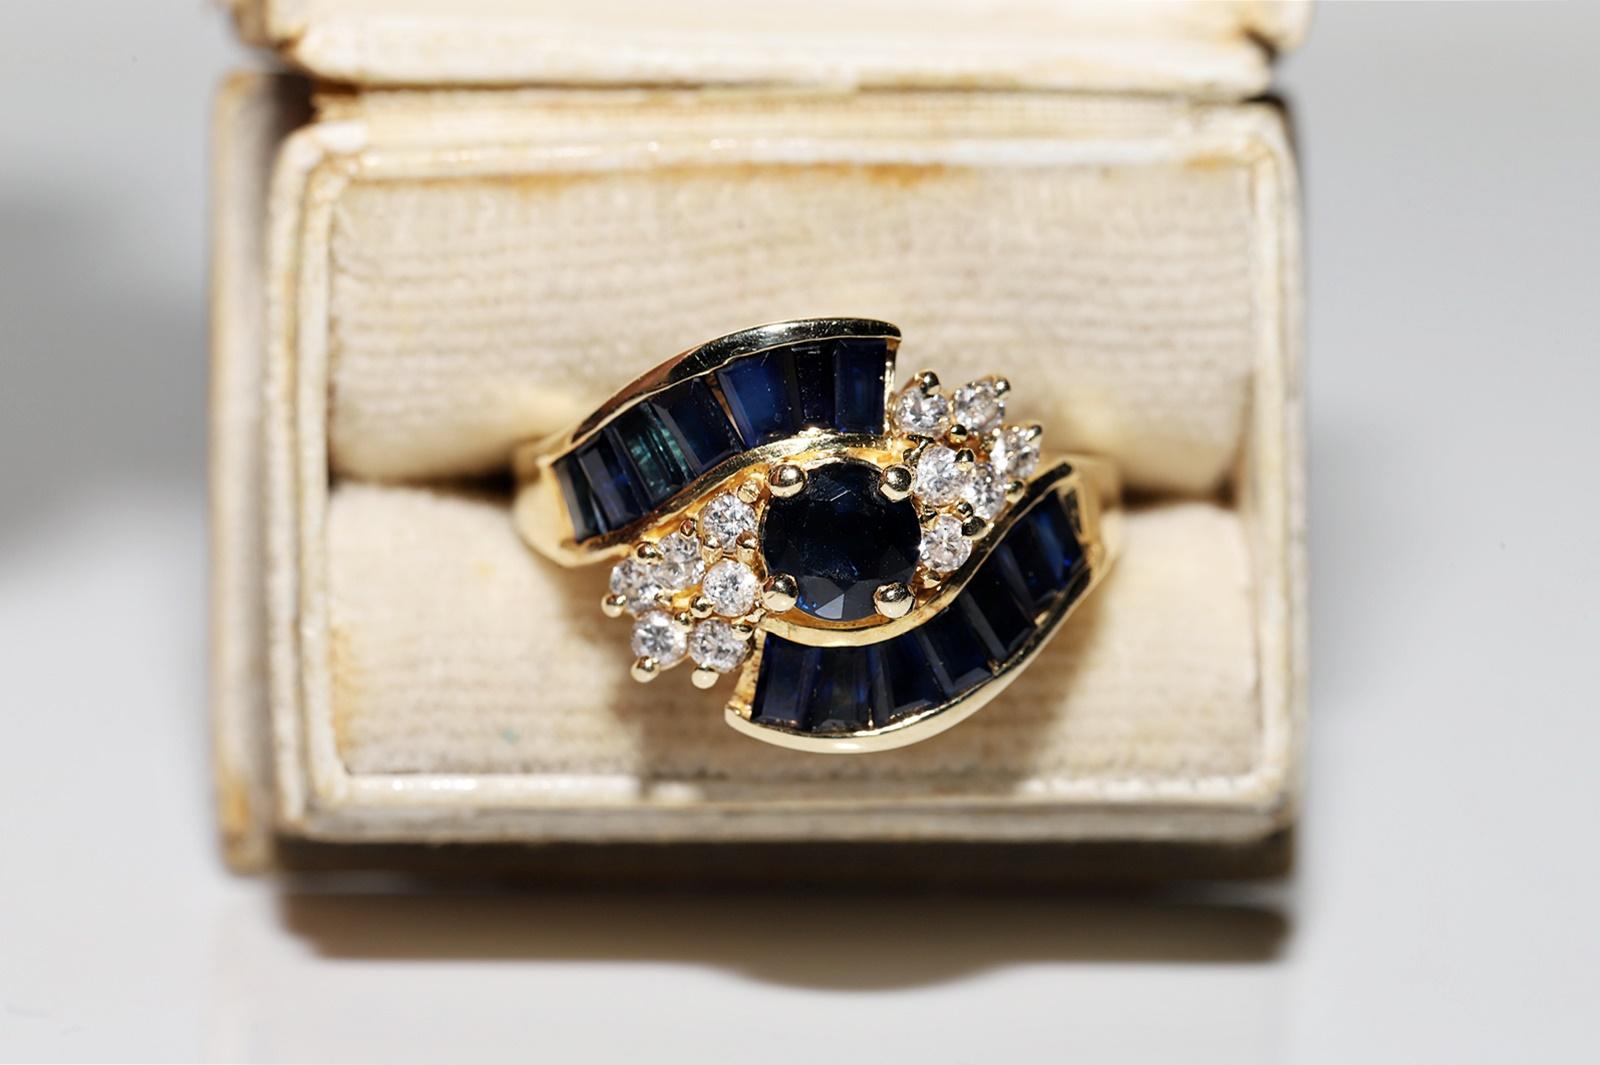 In very good condition.
Total weight is 6.3 grams.
Totally is diamond 0.40 ct.
The diamond is has H color and vs-s1-s2 clarity.
Totally is sapphire 1.60 ct.
Ring size is US 8 (We can make any size)
Box is not included.
Please contact for any